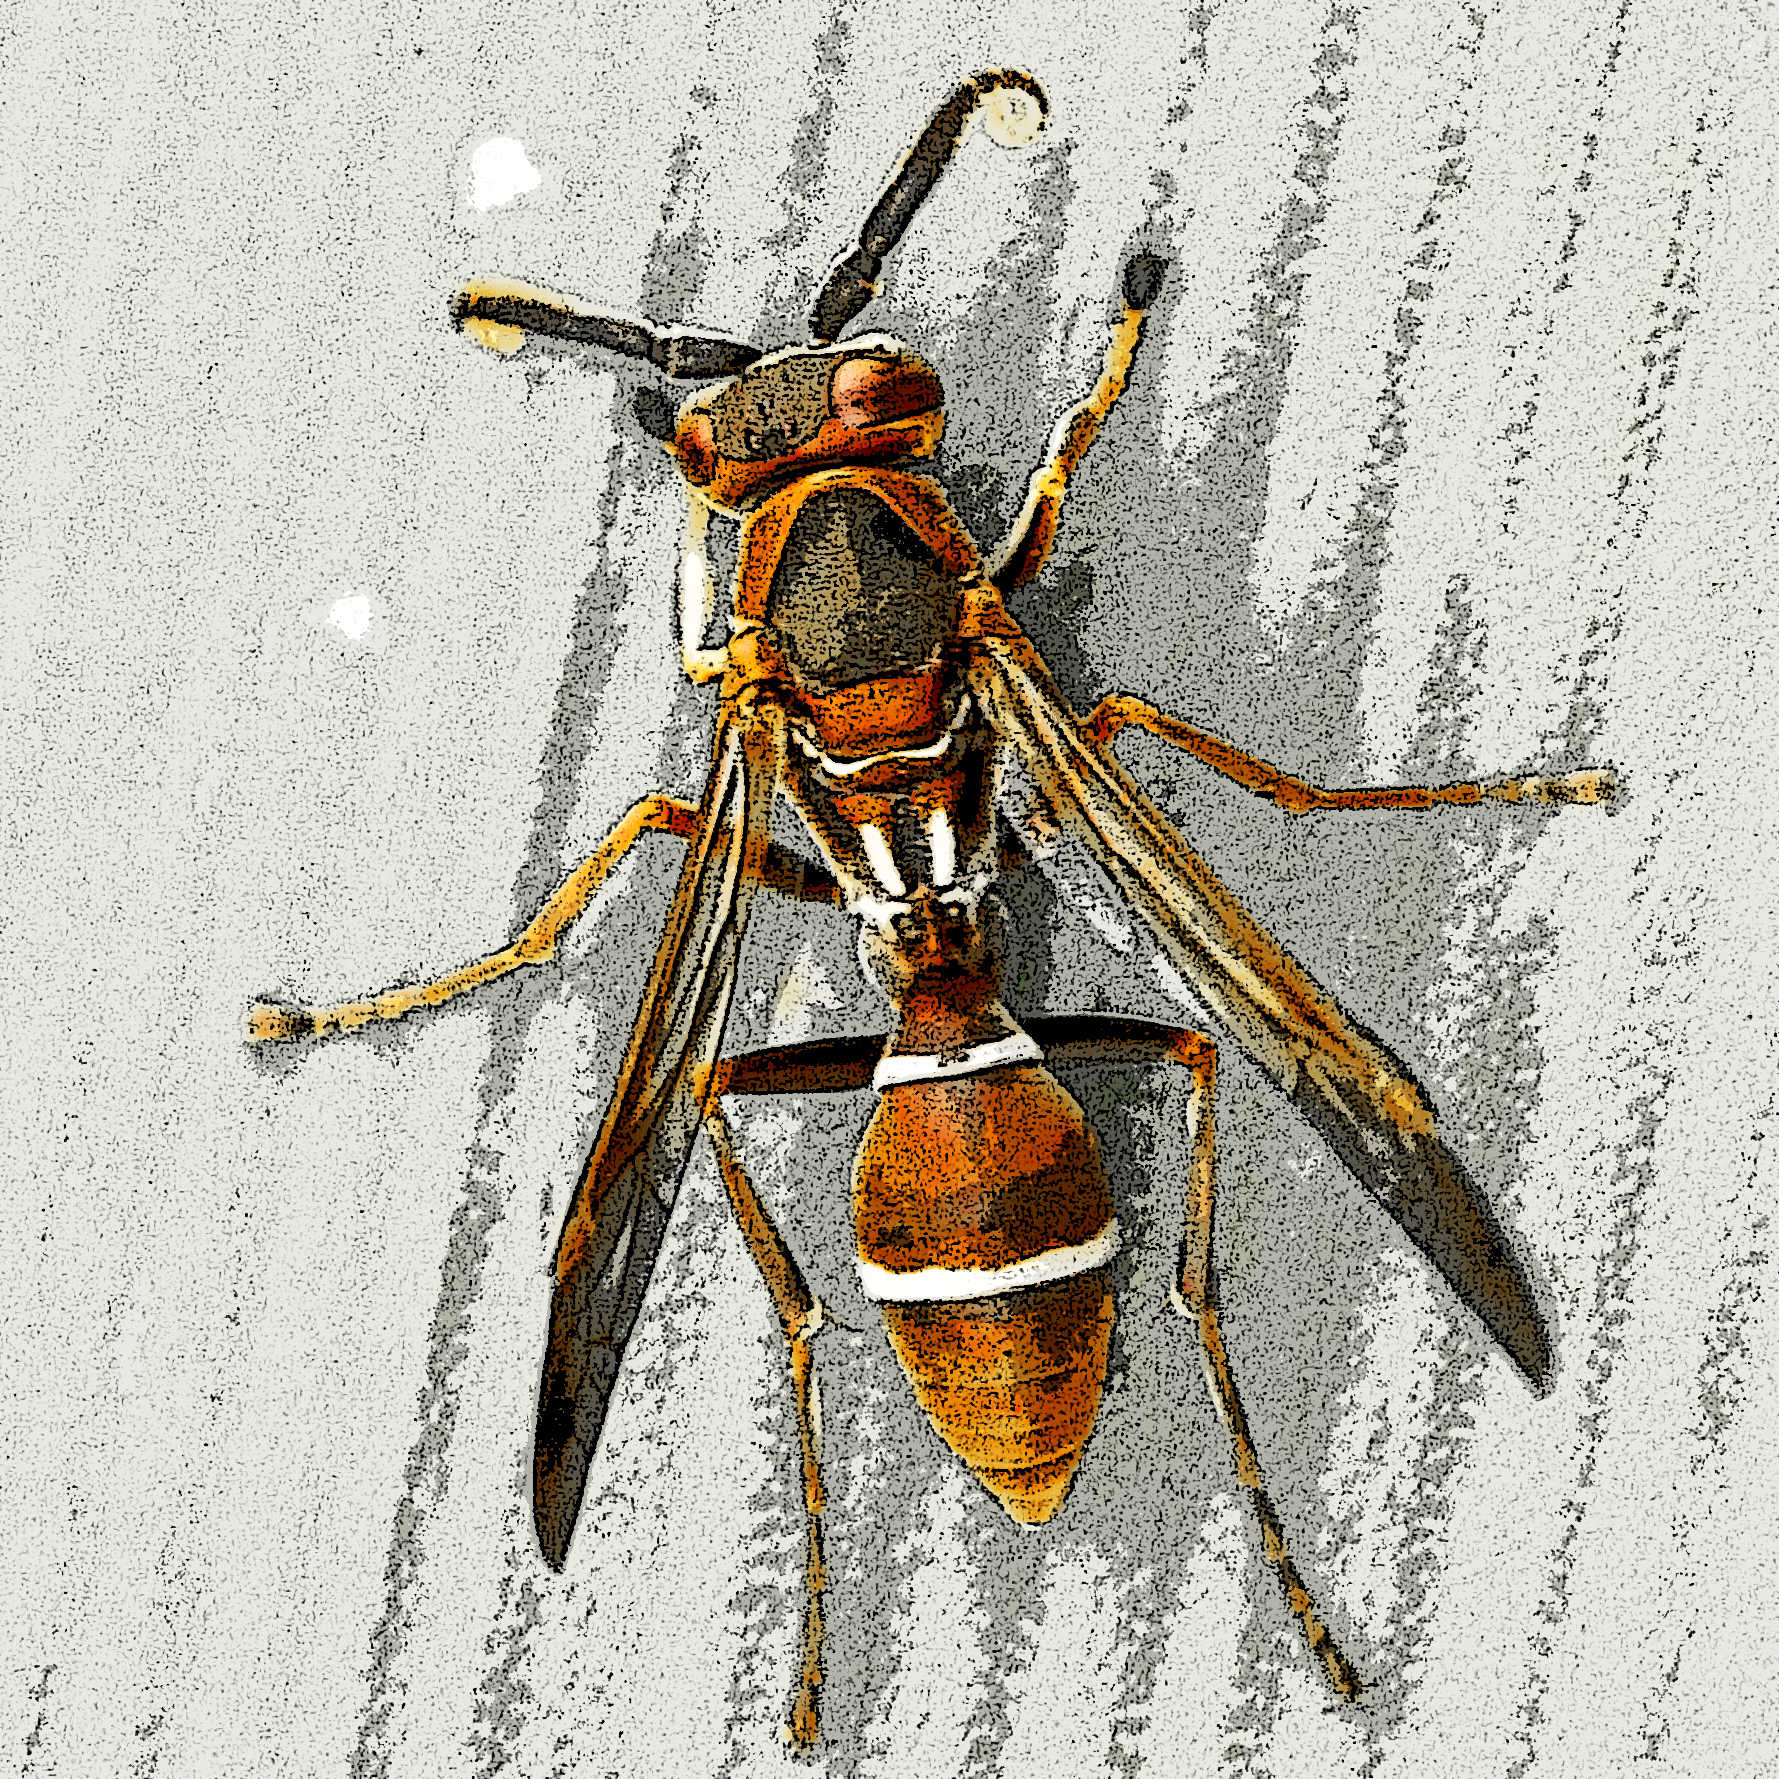 This wasp was 'captured' in Plattenberg Bay, South Africa.